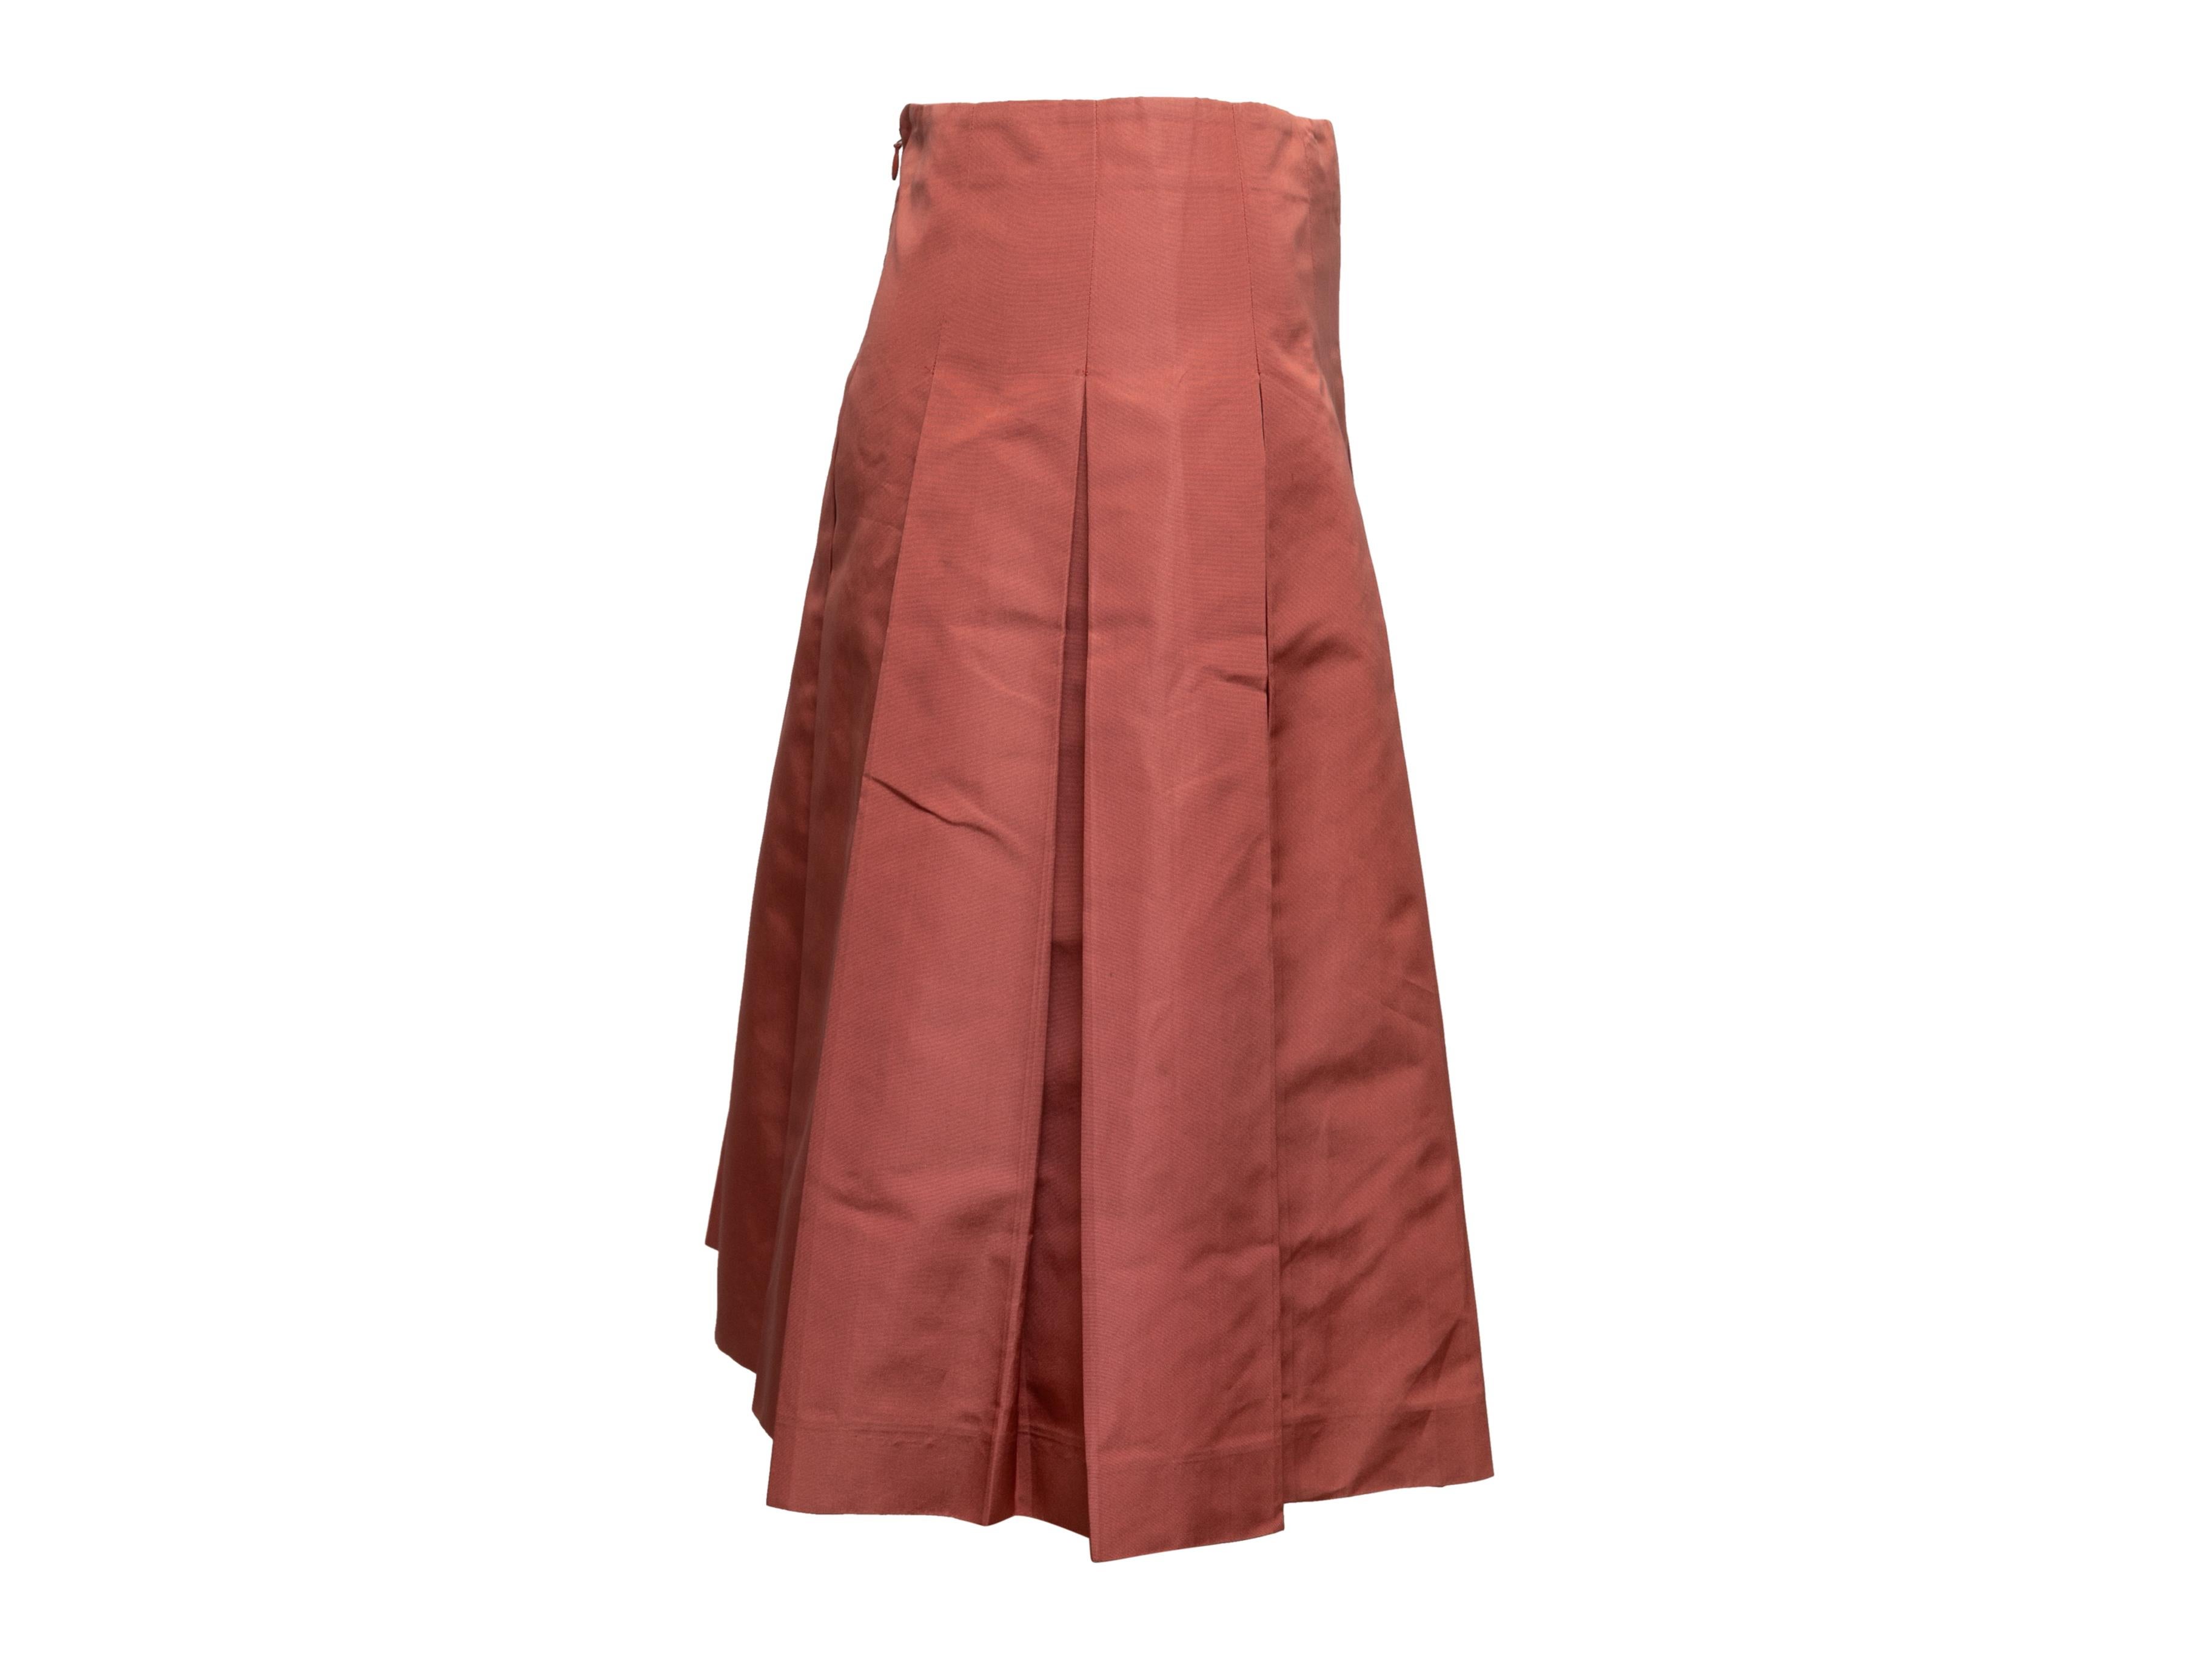 Salmon Prada Silk Pleated Skirt Size IT 38 In Good Condition For Sale In New York, NY